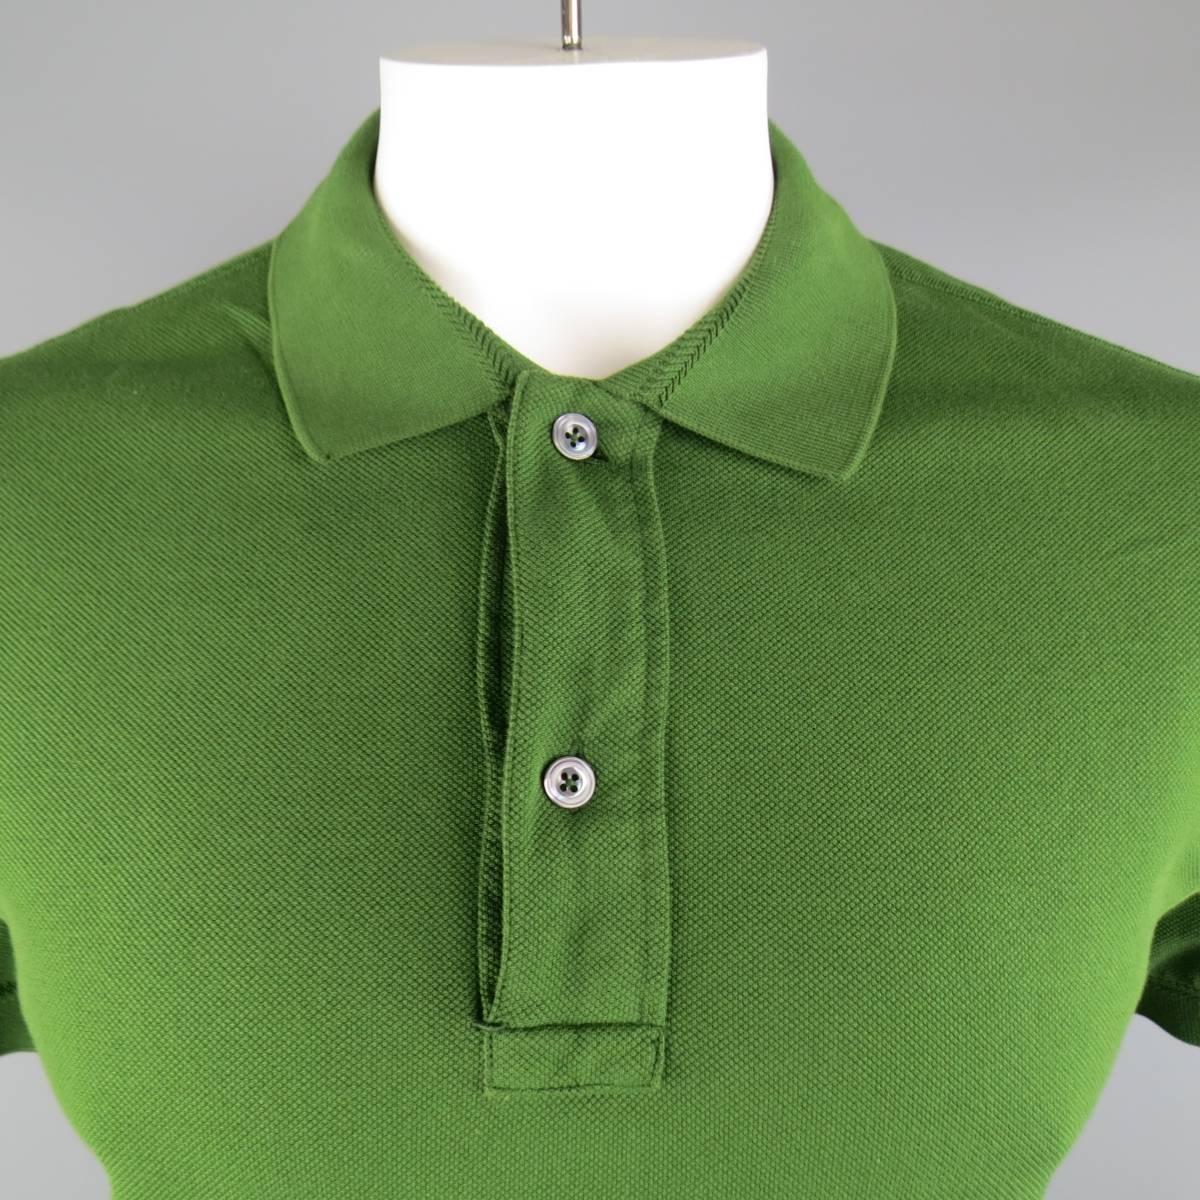 TOM FORD polo comes in green cotton pique material with TF logo at hem. Made in Portugal.
 
Excellent Pre-Owned Condition
Marked Size: 56 IT
 
Measurements
 
Shoulders: 19 in.
Sleeve: 9 in.
Chest: 46 in.
Length: 29 in.